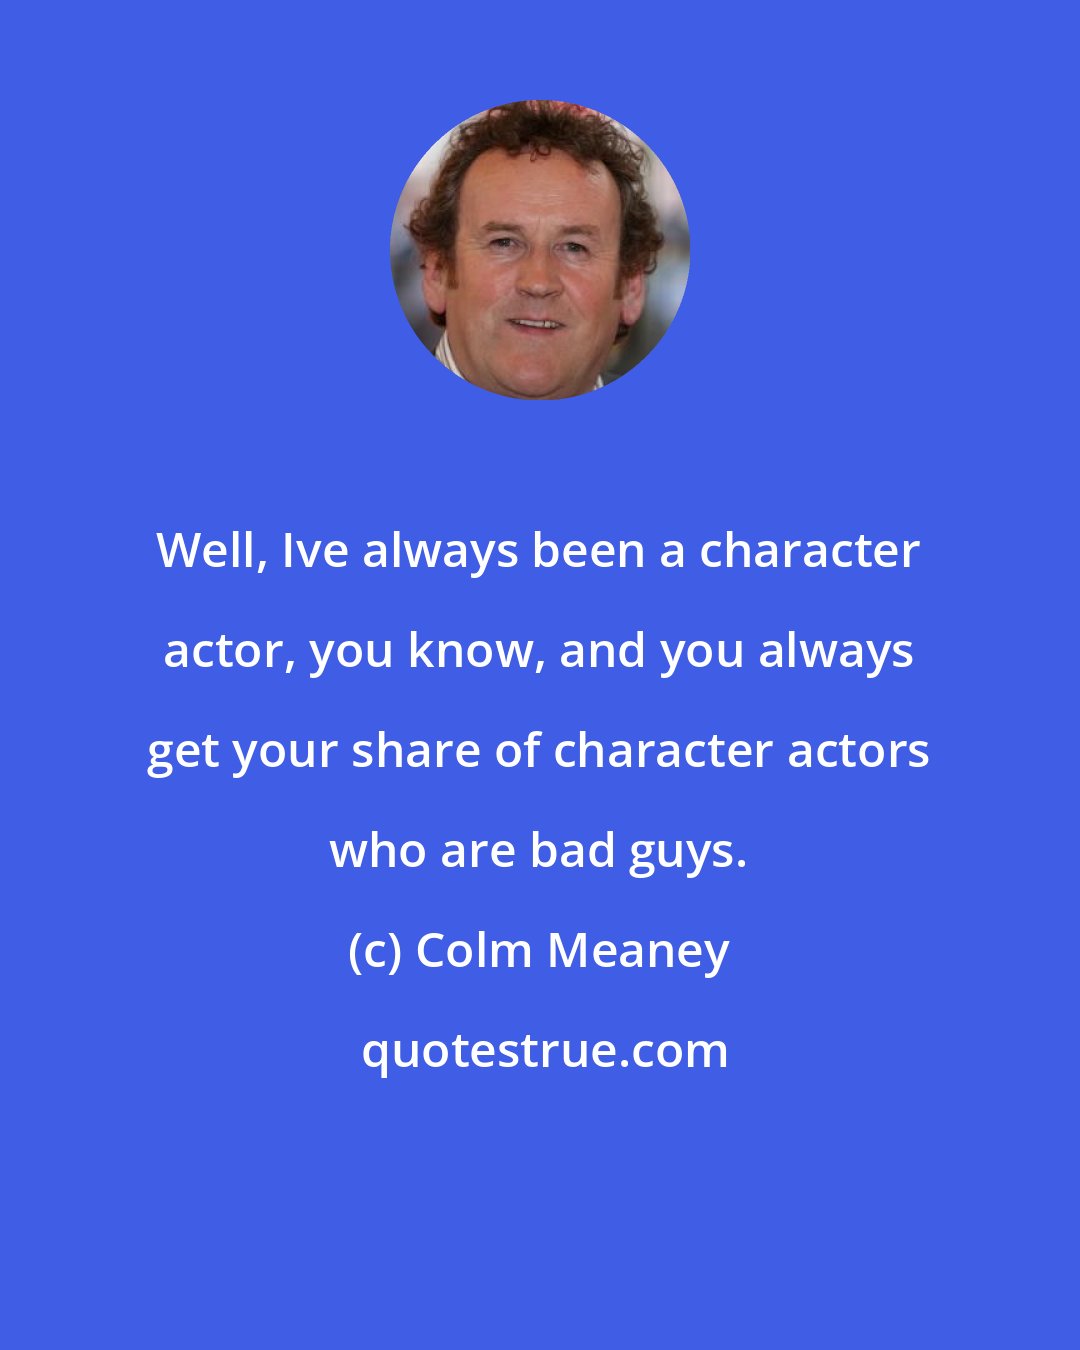 Colm Meaney: Well, Ive always been a character actor, you know, and you always get your share of character actors who are bad guys.